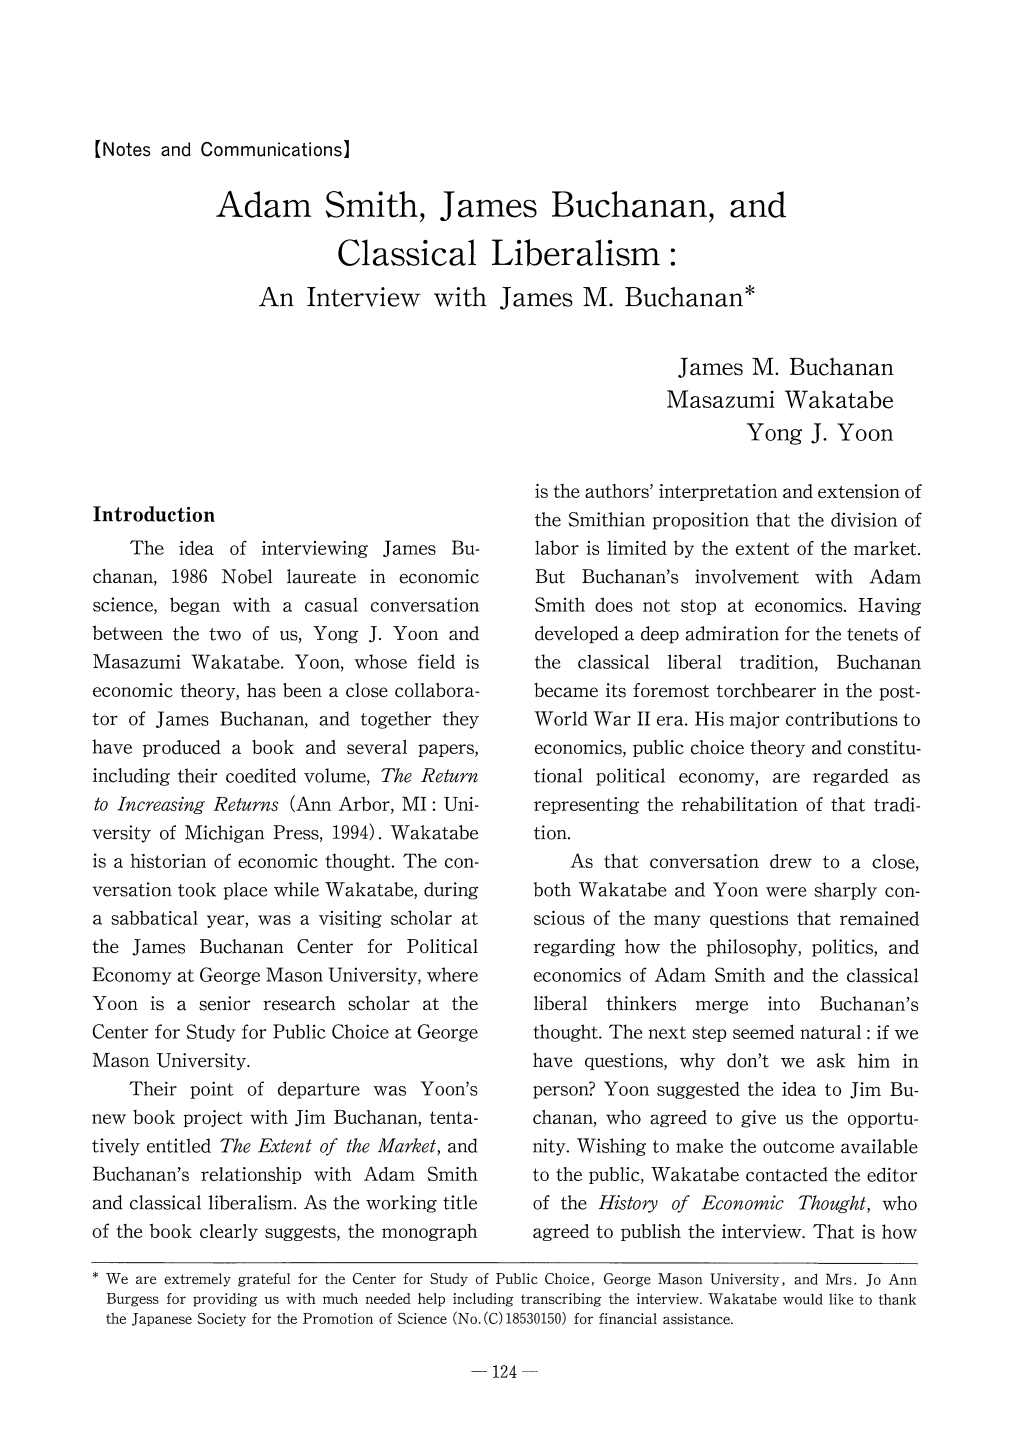 Adam Smith, James Buchanan, and Classical Liberalism: an Interview with James M